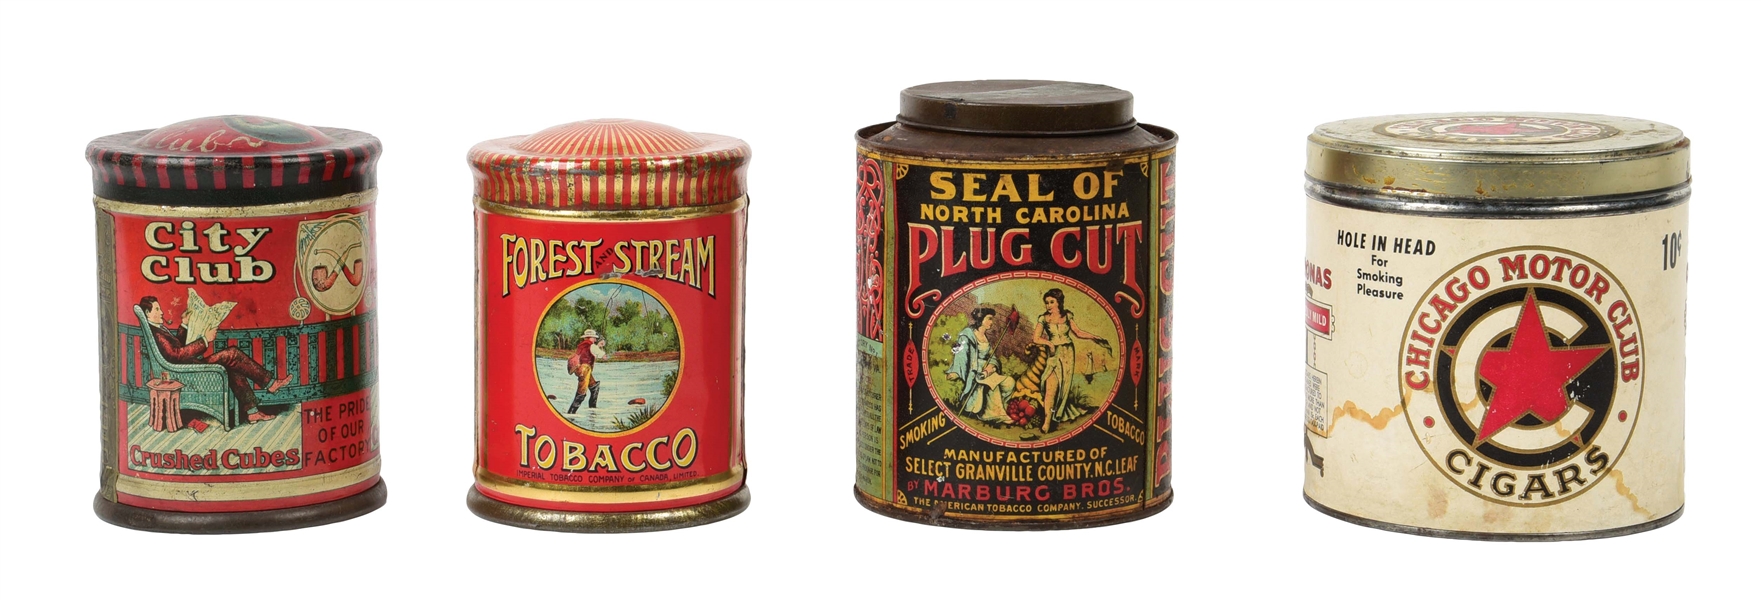 COLLECTION OF 4 EARLY 1900S TOBACCO TINS.